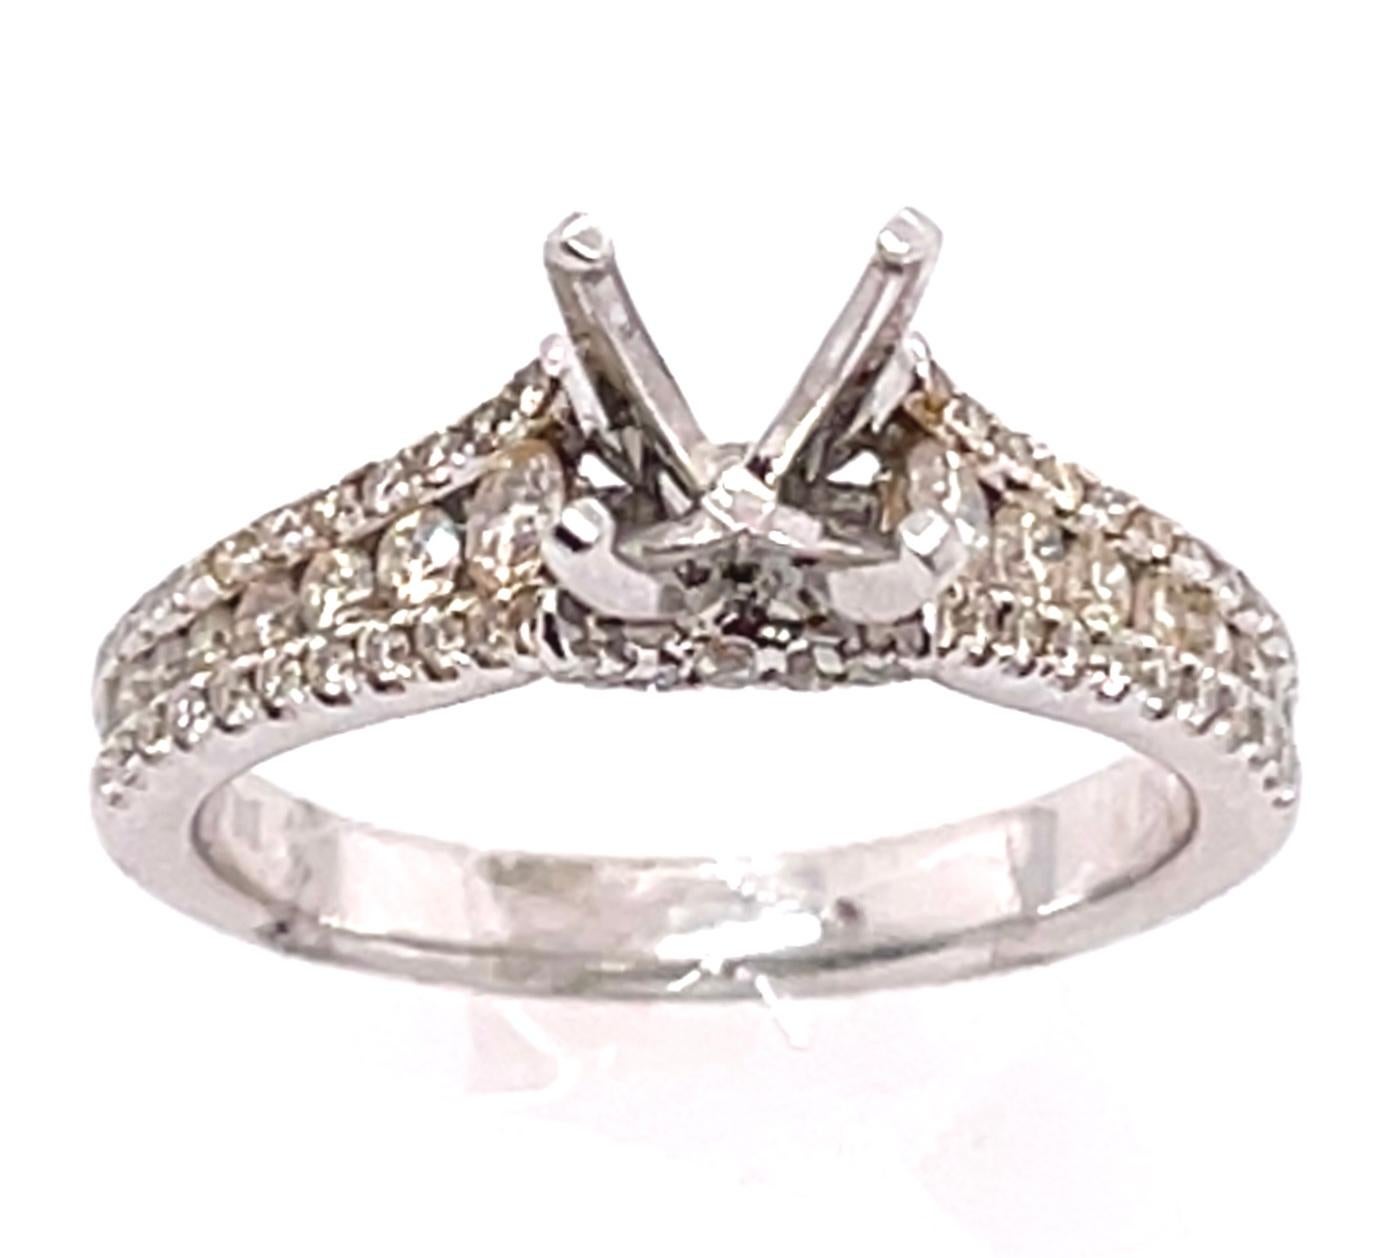 18 Karat White Gold Engagement Ring Setting With Three Tier Accent Diamond Band
Size 6.75
0.68 total diamond weight.
5.1 grams total weight.